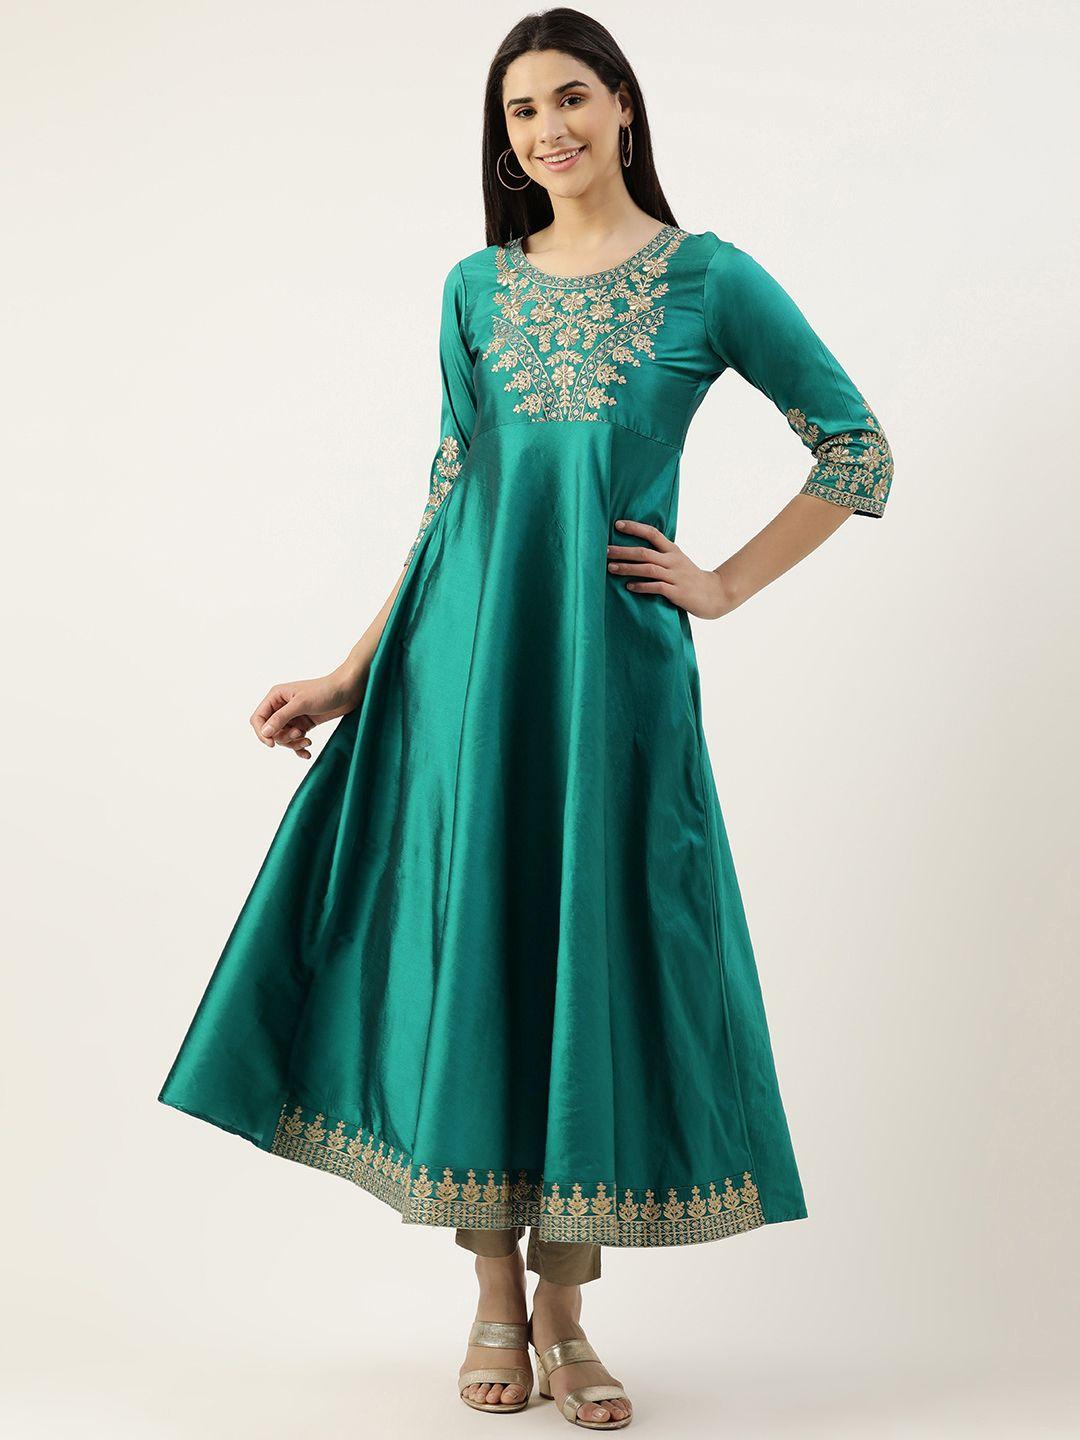 swagg-india-embroidered-ethnic-motifs-maxi-dress